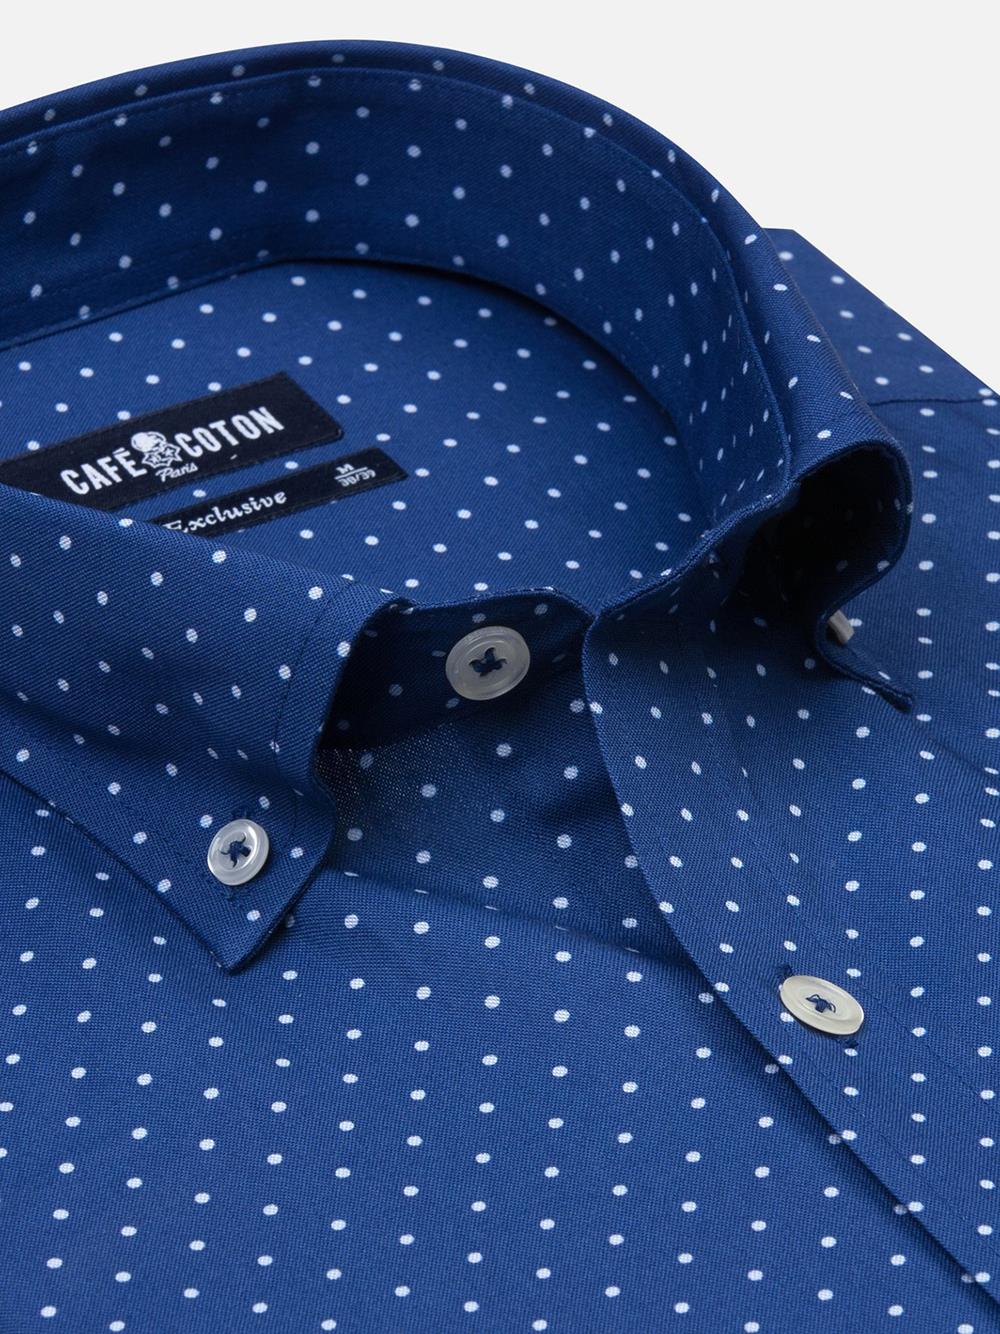 Blue spotted white popelin shirt - Button down collar